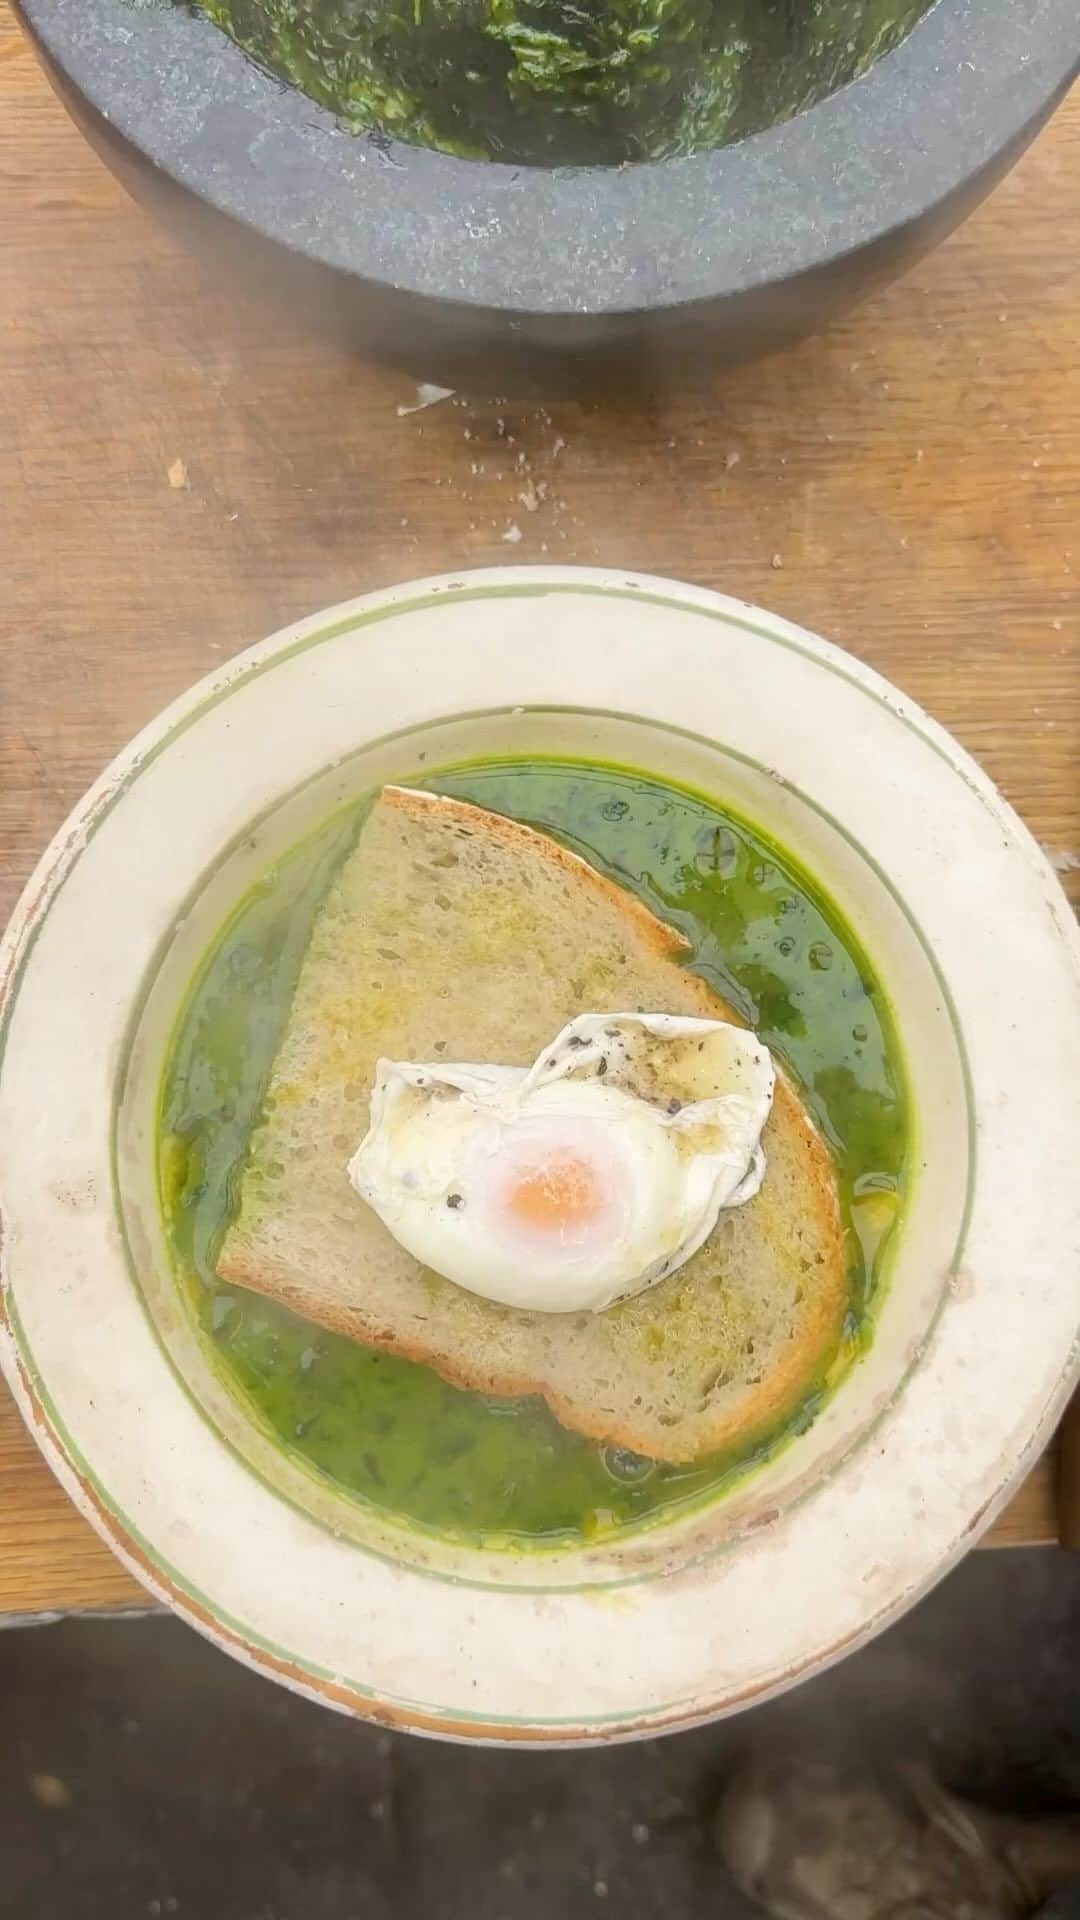 Earth Picsのインスタグラム：「@juliusroberts “This soup will blow you away. Garlic, coriander, stale bread and a poached egg. So simple, but so good! This is based on a portuguese dish called acorda, which is traditionally made with salt cod broth. But thats hard to find here in england, so I made it with chicken stock and wow. What a recipe, I love it. Takes no time at all and uses just a few humble ingredients. Enjoy!”   🎥 @juliusroberts」